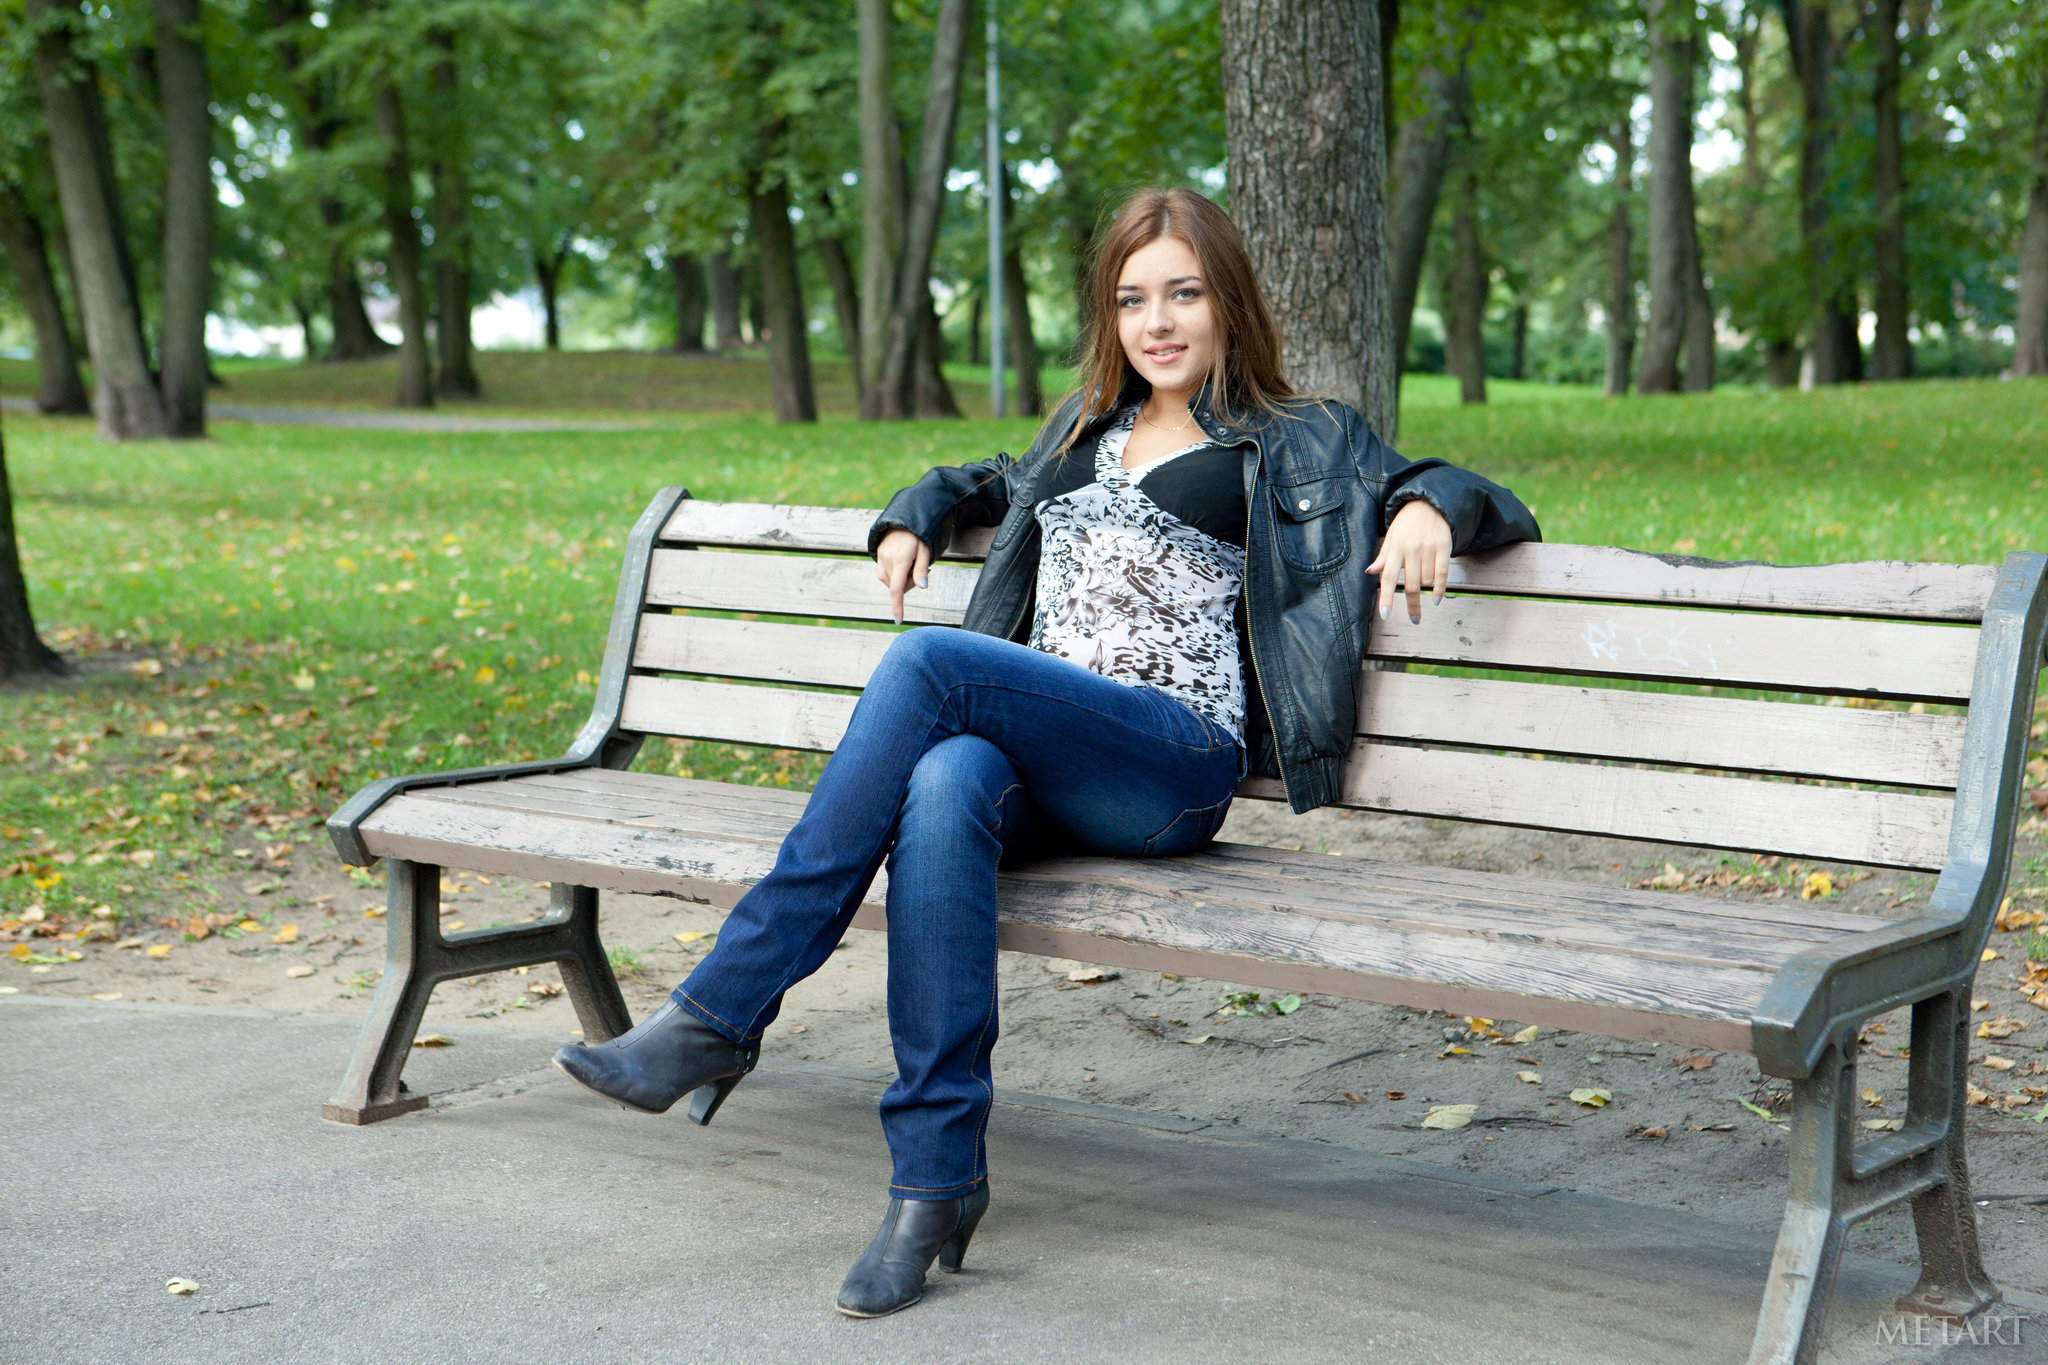 Model Women Outdoors Looking At Viewer Sitting Brunette Legs Crossed Bench Park Leather Jackets Blac 2048x1365